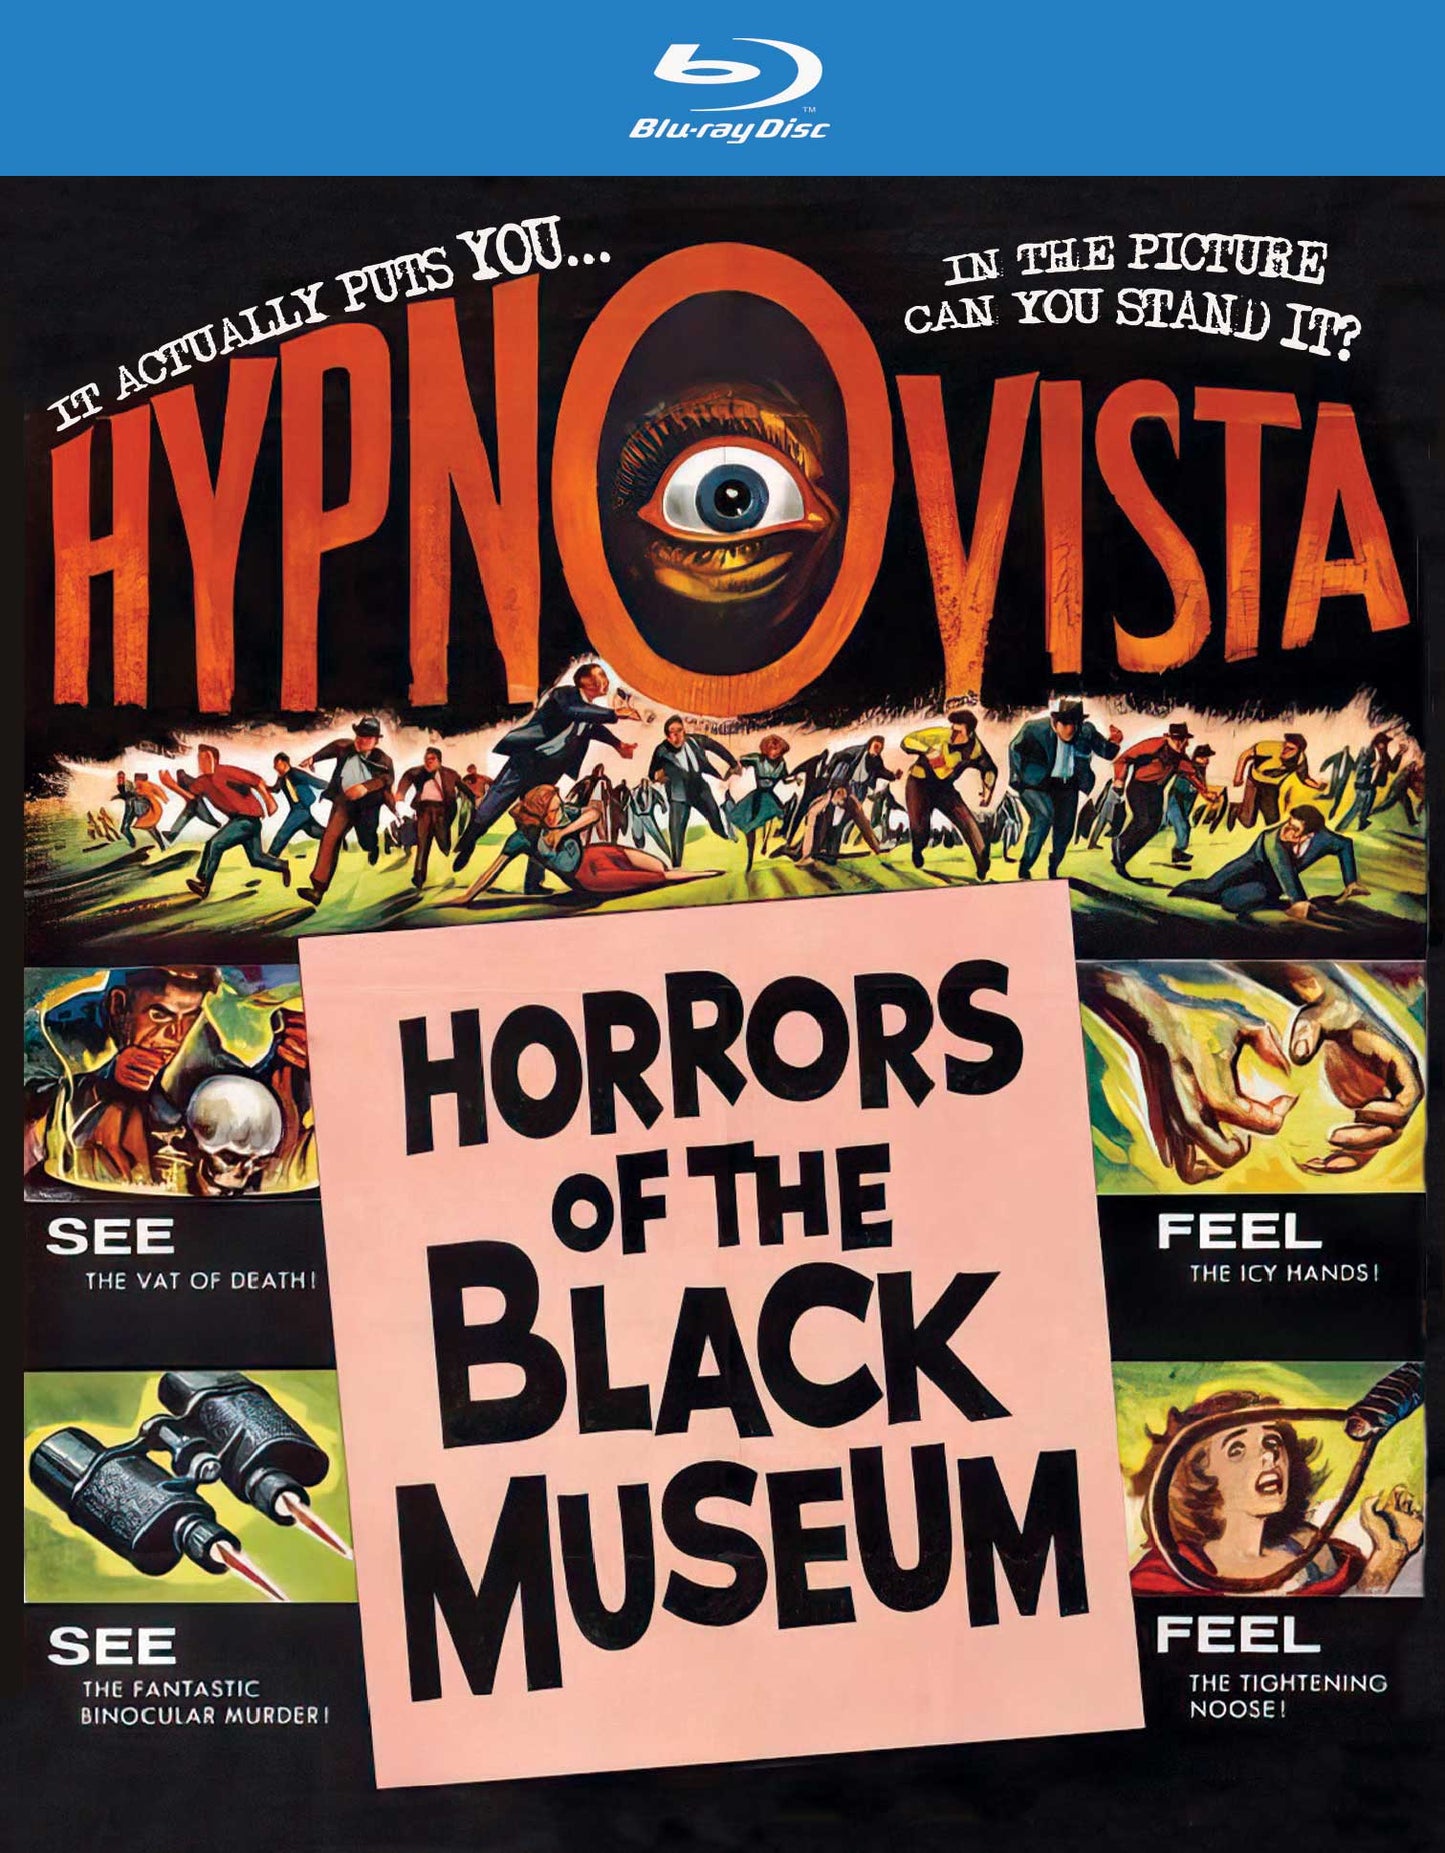 Horrors Of The Black Museum - Restored Uncut Special Edition Blu-ray (VCI Entertainment/U.S.) [Preorder]